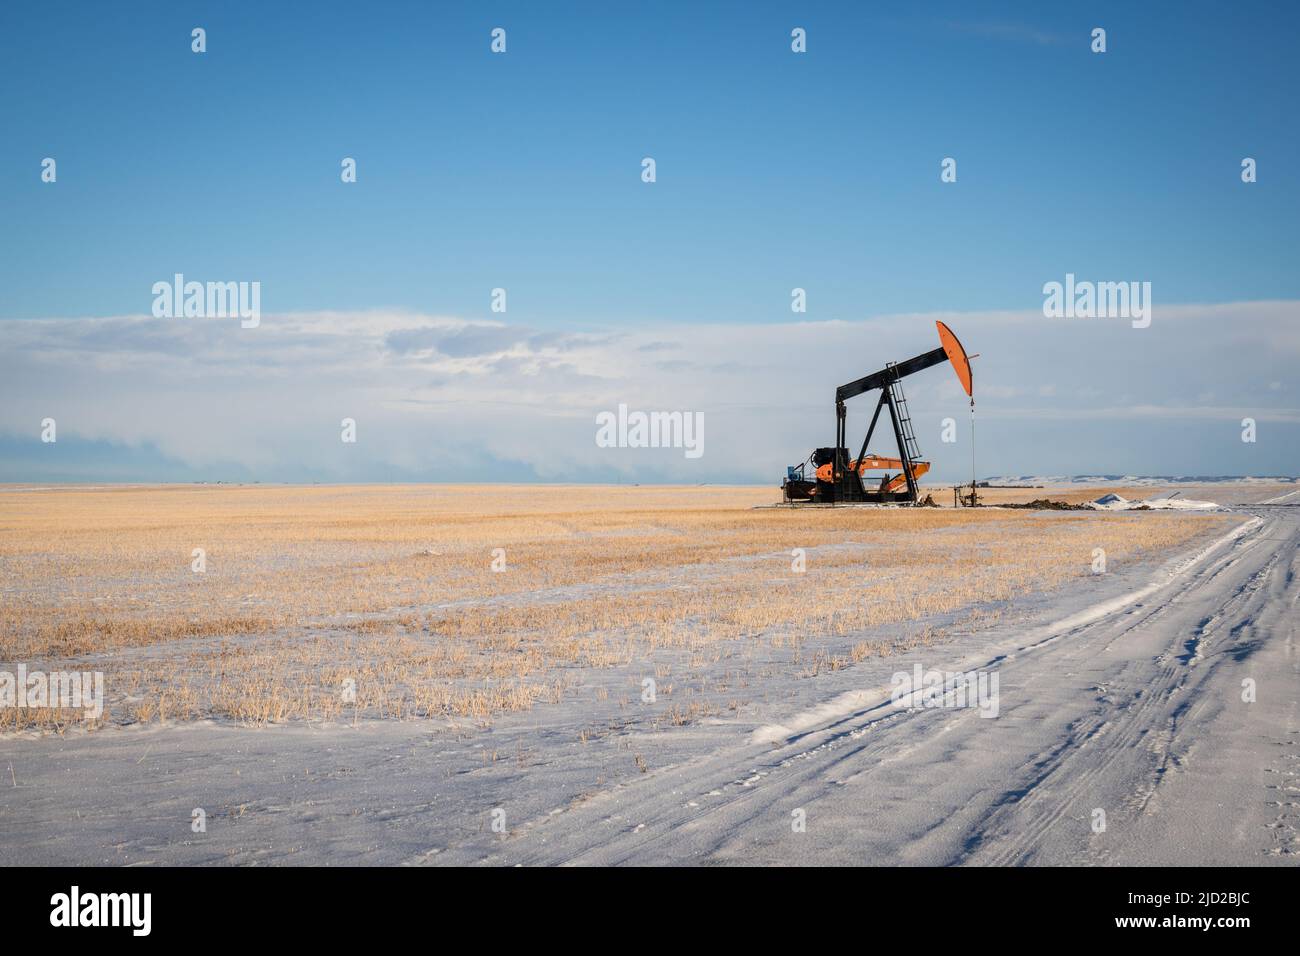 Small oil pump in field covered in snow with copy space. Stock Photo